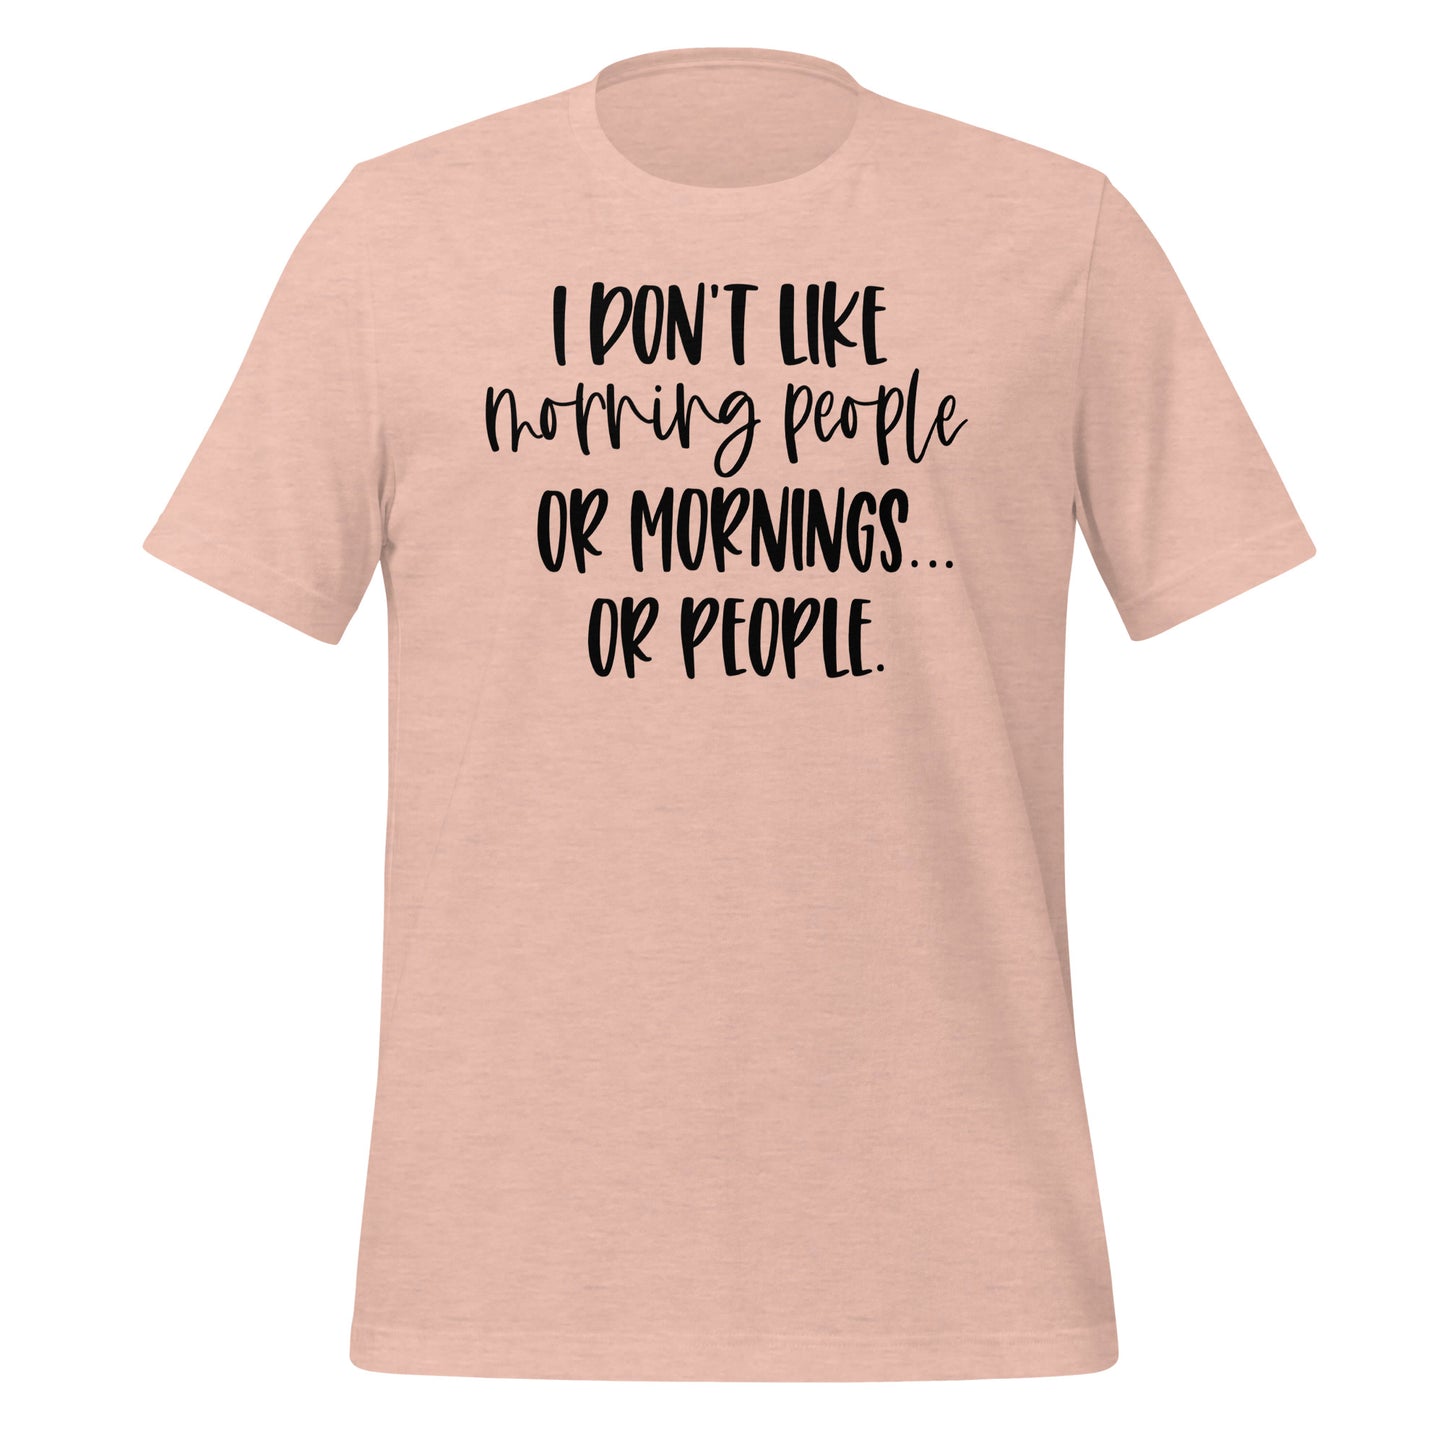 I Don't Like Morning People, Mornings, or People Tshirt